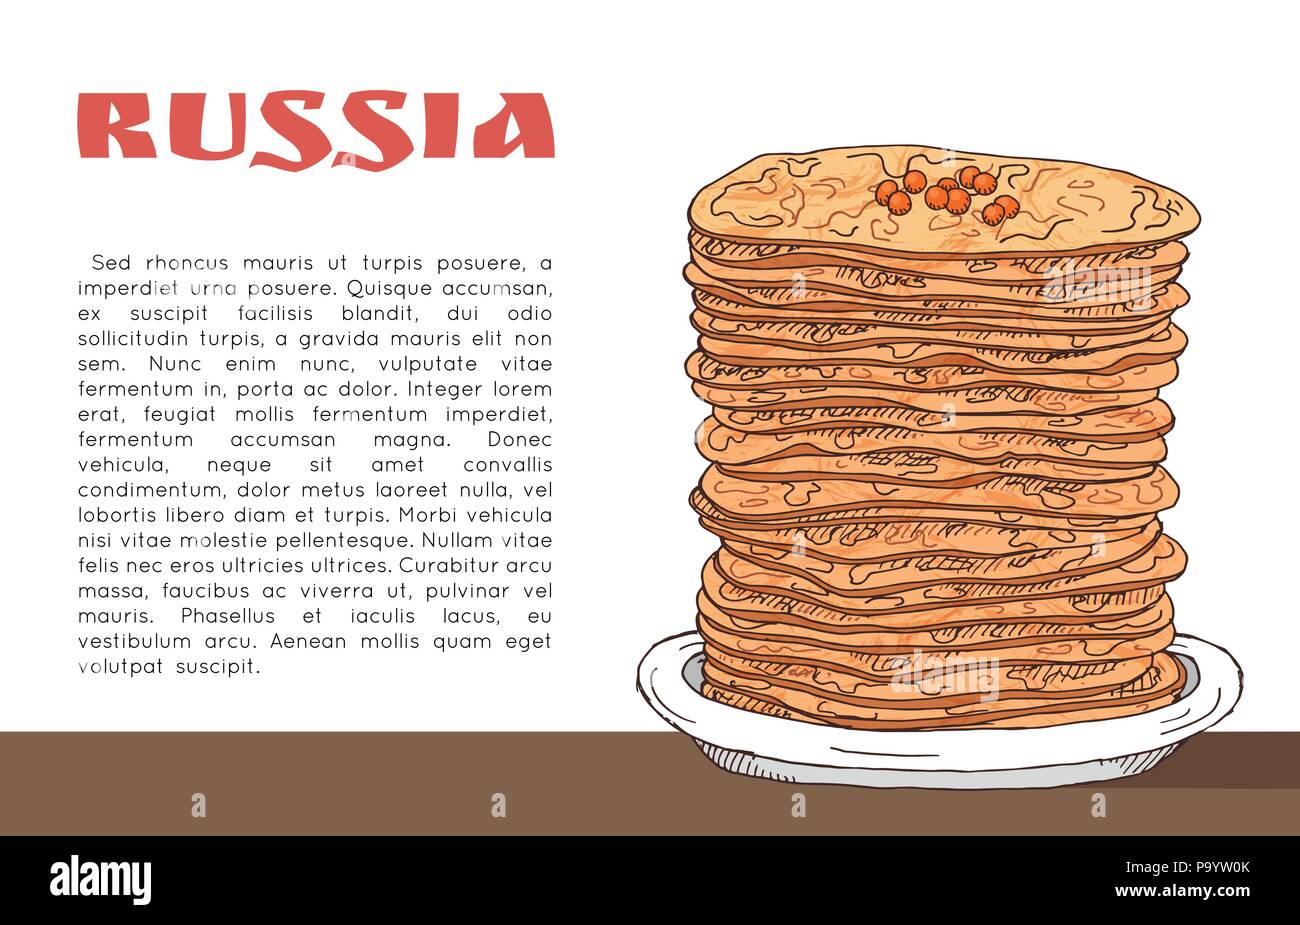 Banner with pancakes with red caviar on the table, inscription russia and place for text. Traditional russian food. Hand drawn doodle illustration Stock Vector